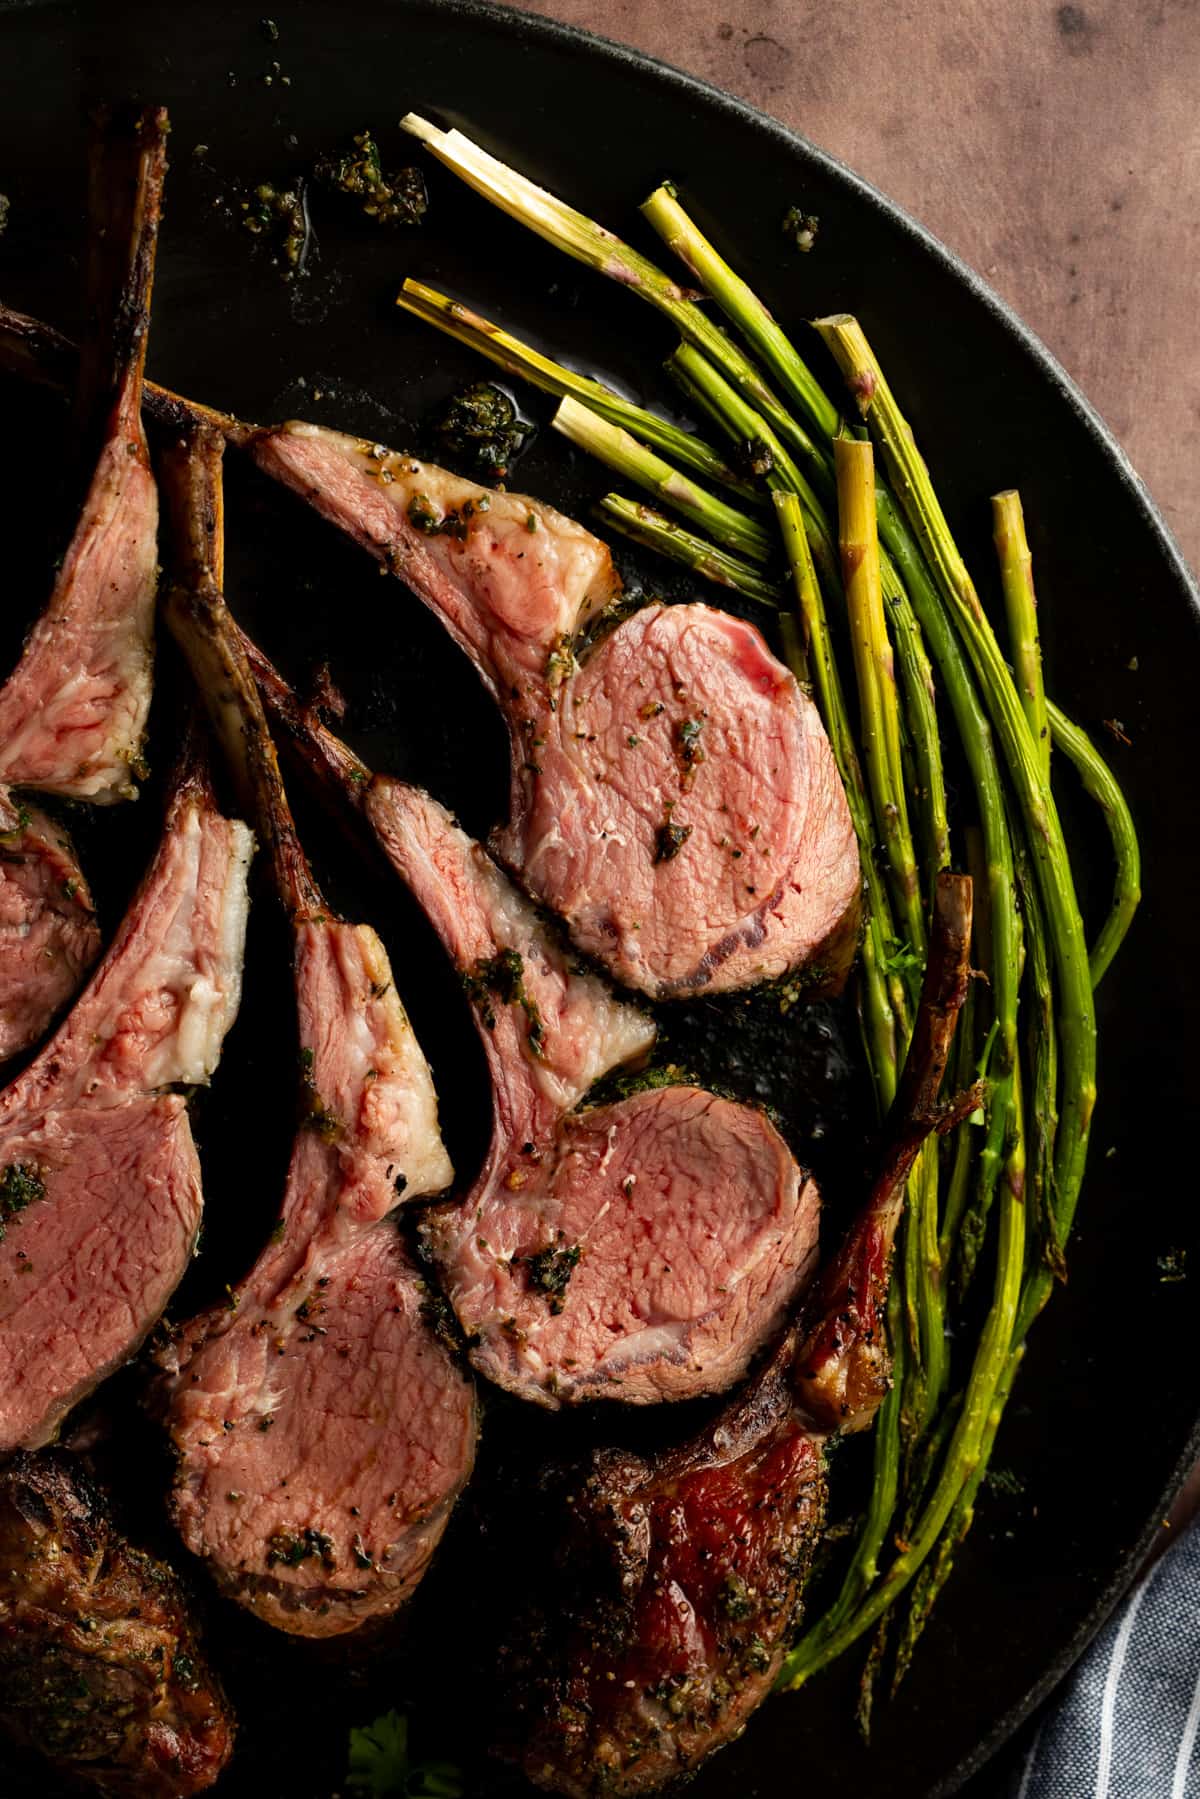 Lamb chops on black plate with a side of asparagus.